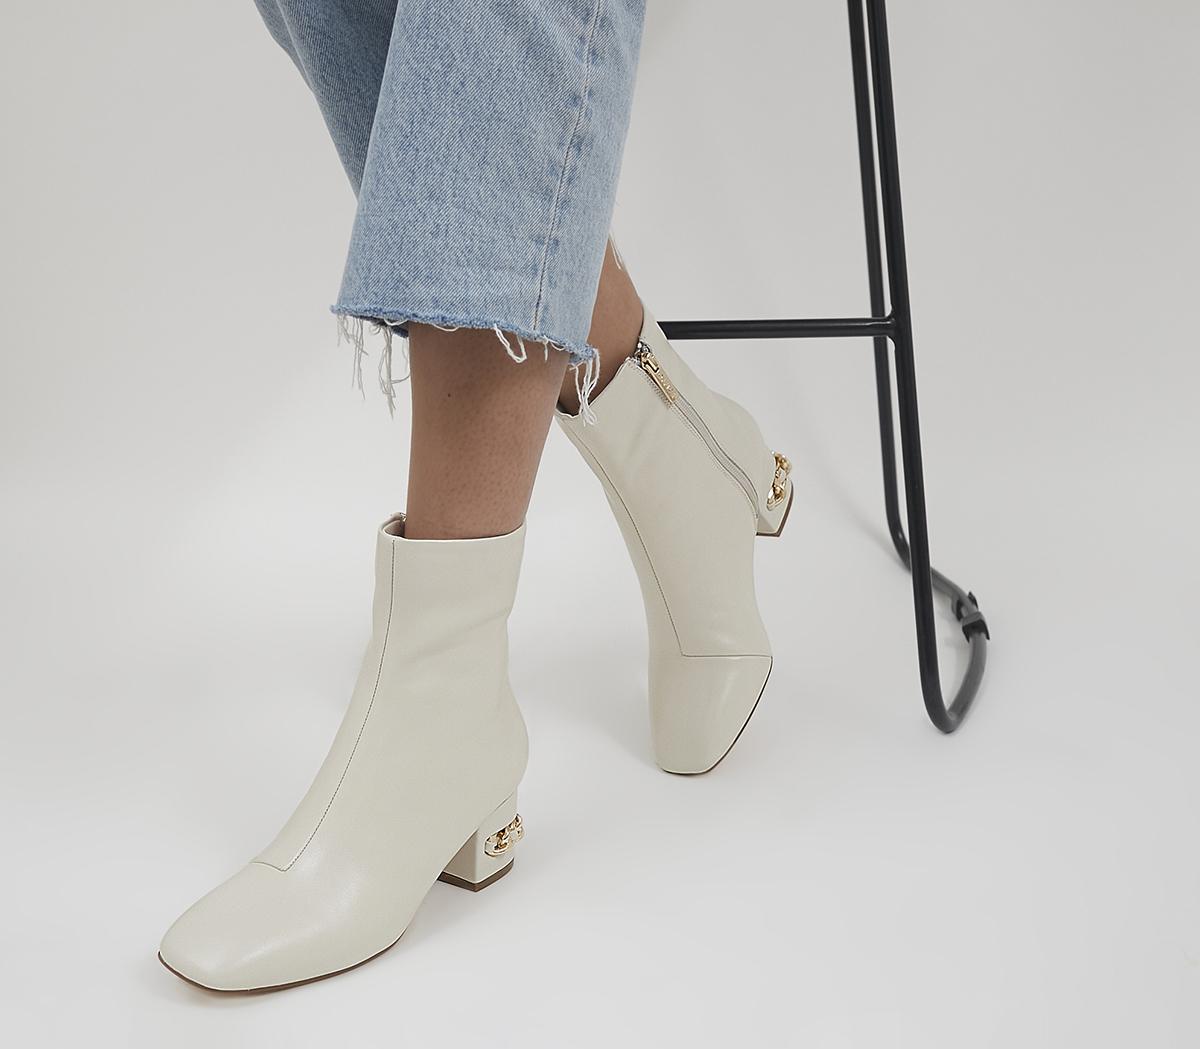 OfficeArna Chain Heeled Ankle BootsOff White Leather